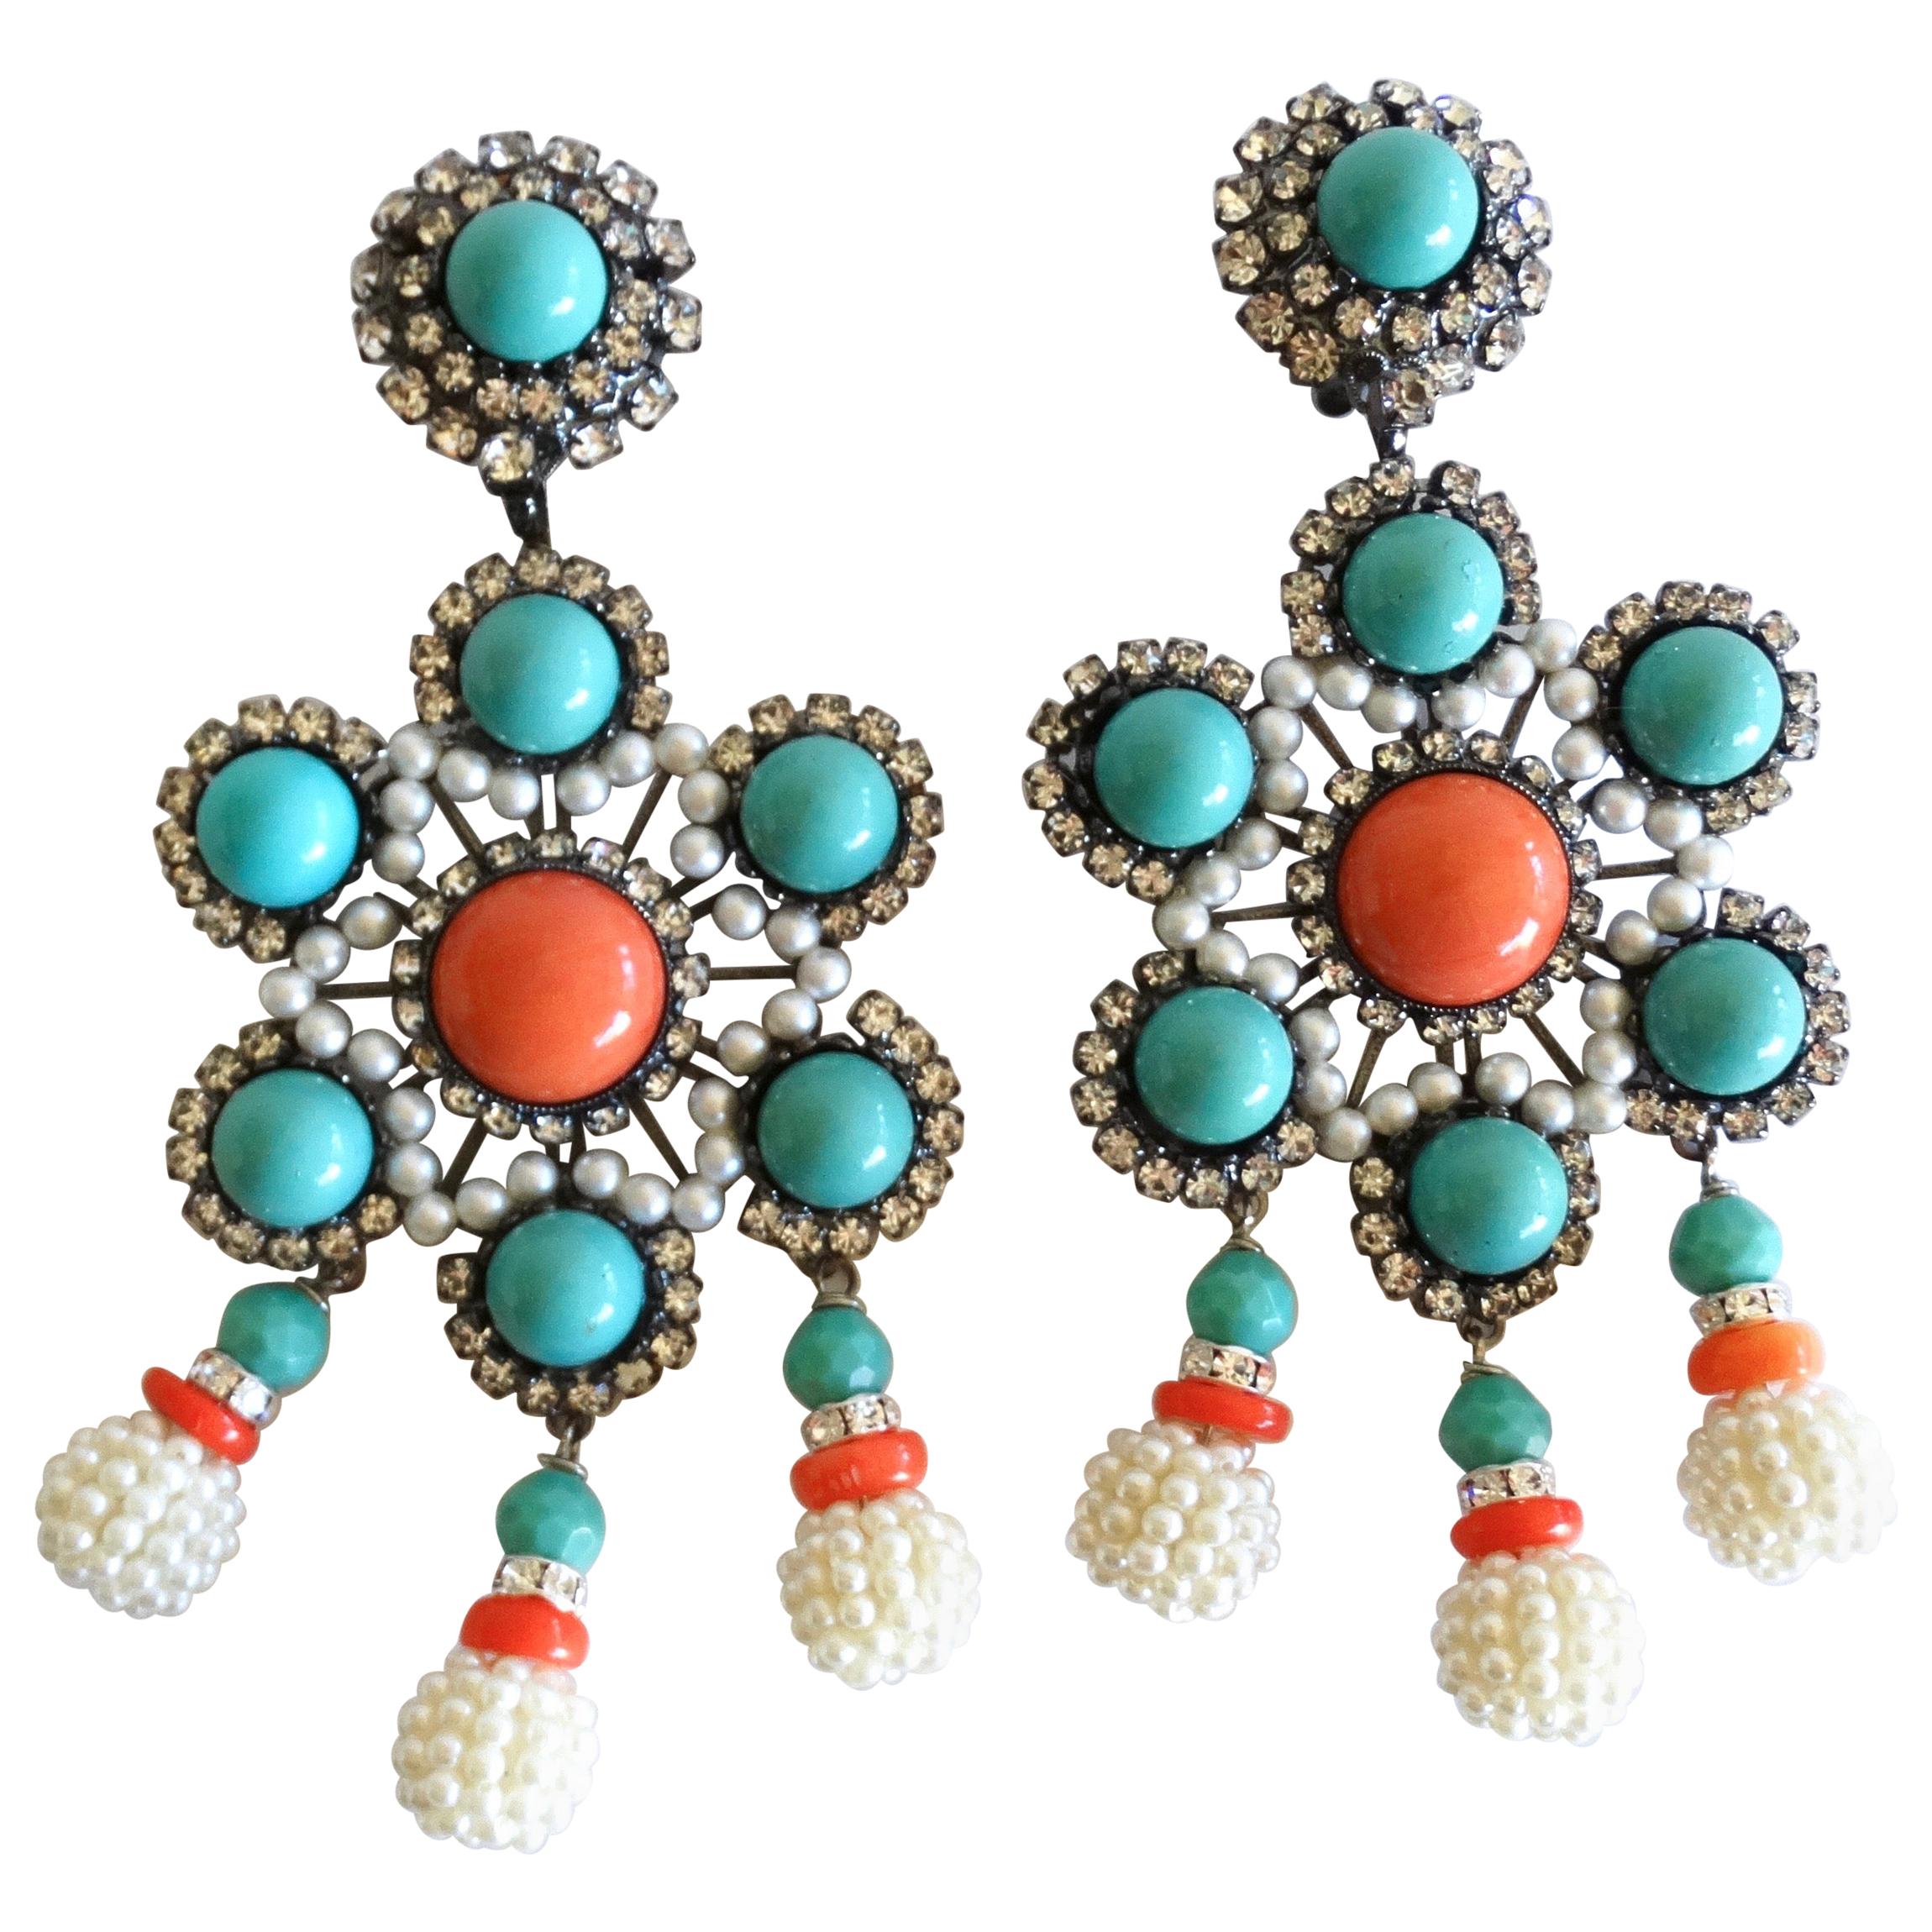 Bead embroidered earrings Coral and turquoise chandelier earrings Handmade Red blue statement earrings for women Large gemstone earrings